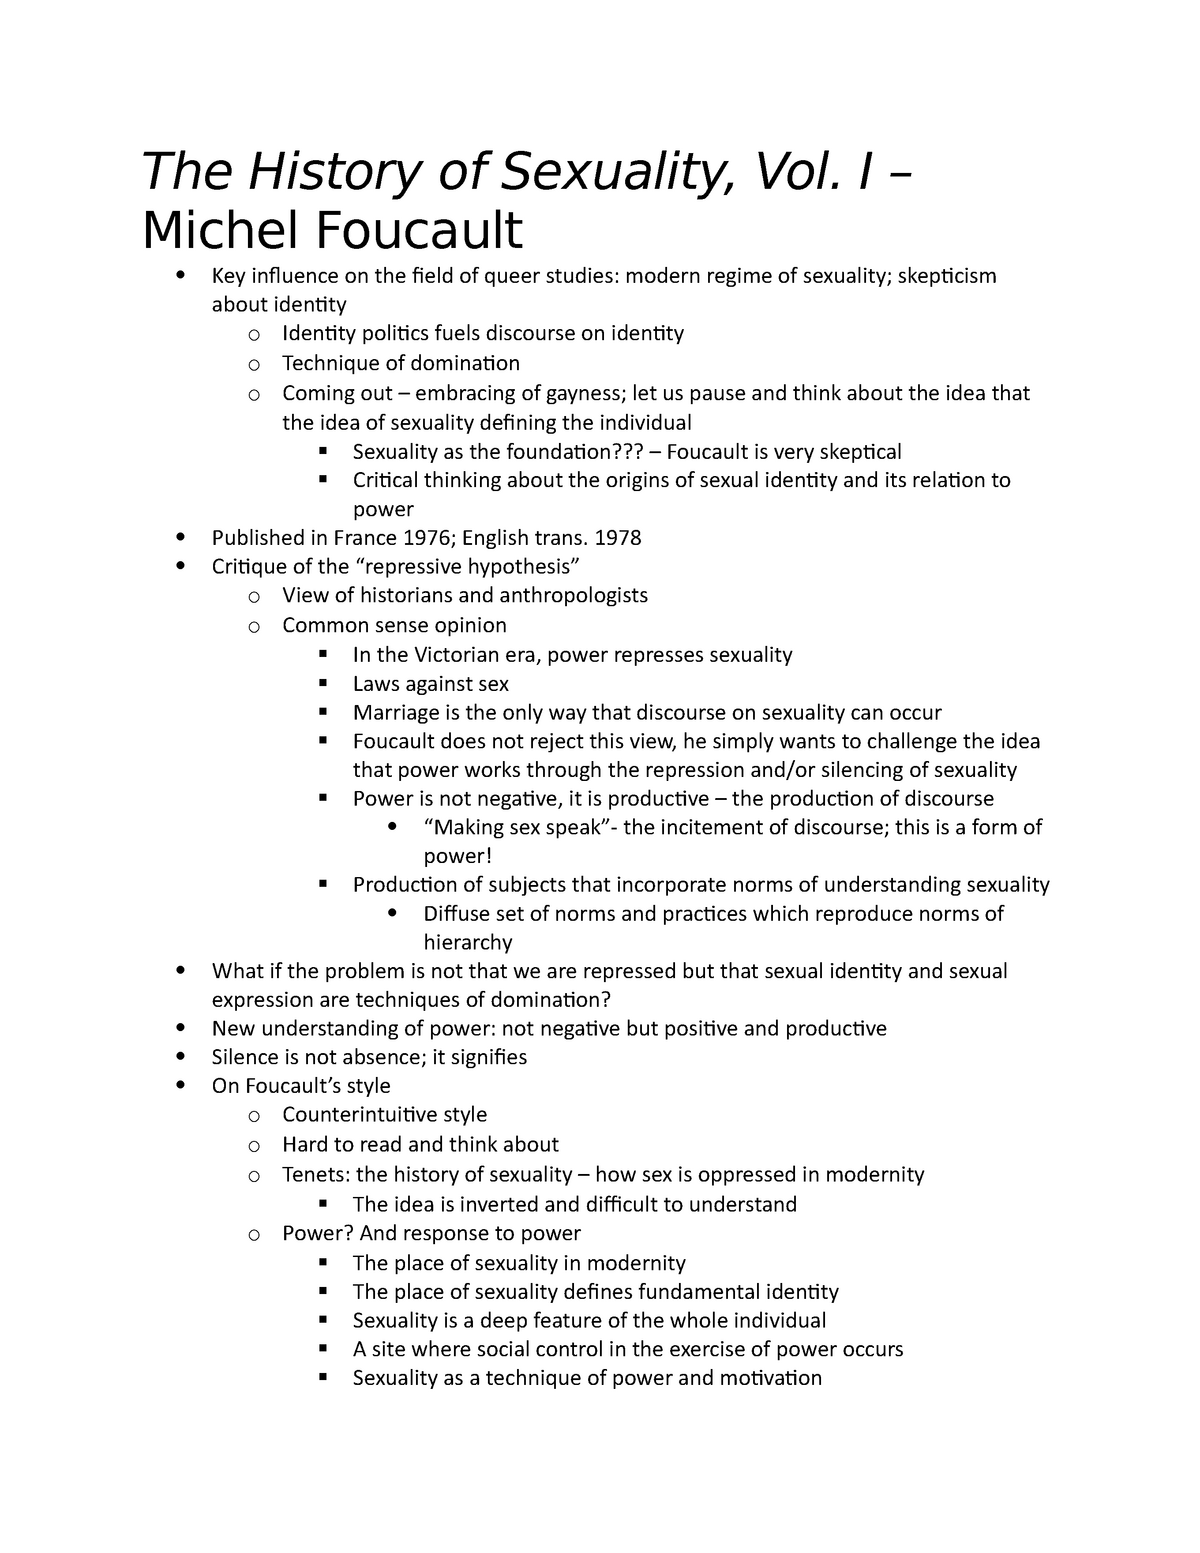 The History Of Sexuality Vol 1 Michel Foucault The History Of Sexuality Vol I Michel 4159